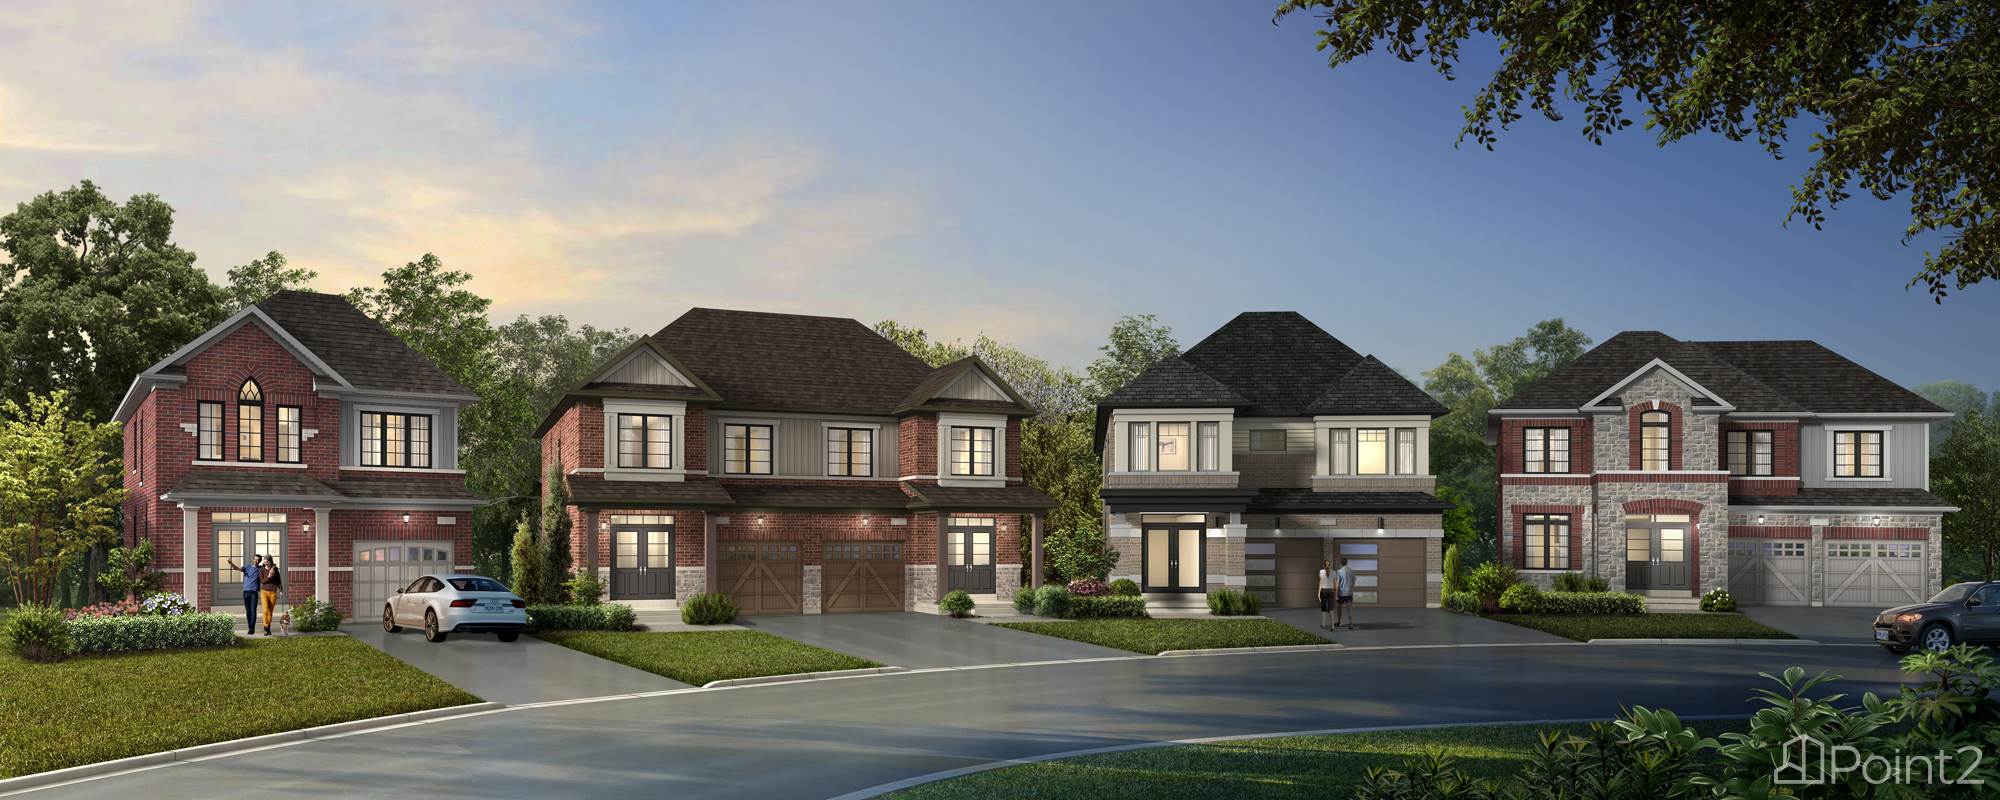 4 Bedroom Residential Home For Sale | Courtice Preconstruction Townhouse | Clarington | null